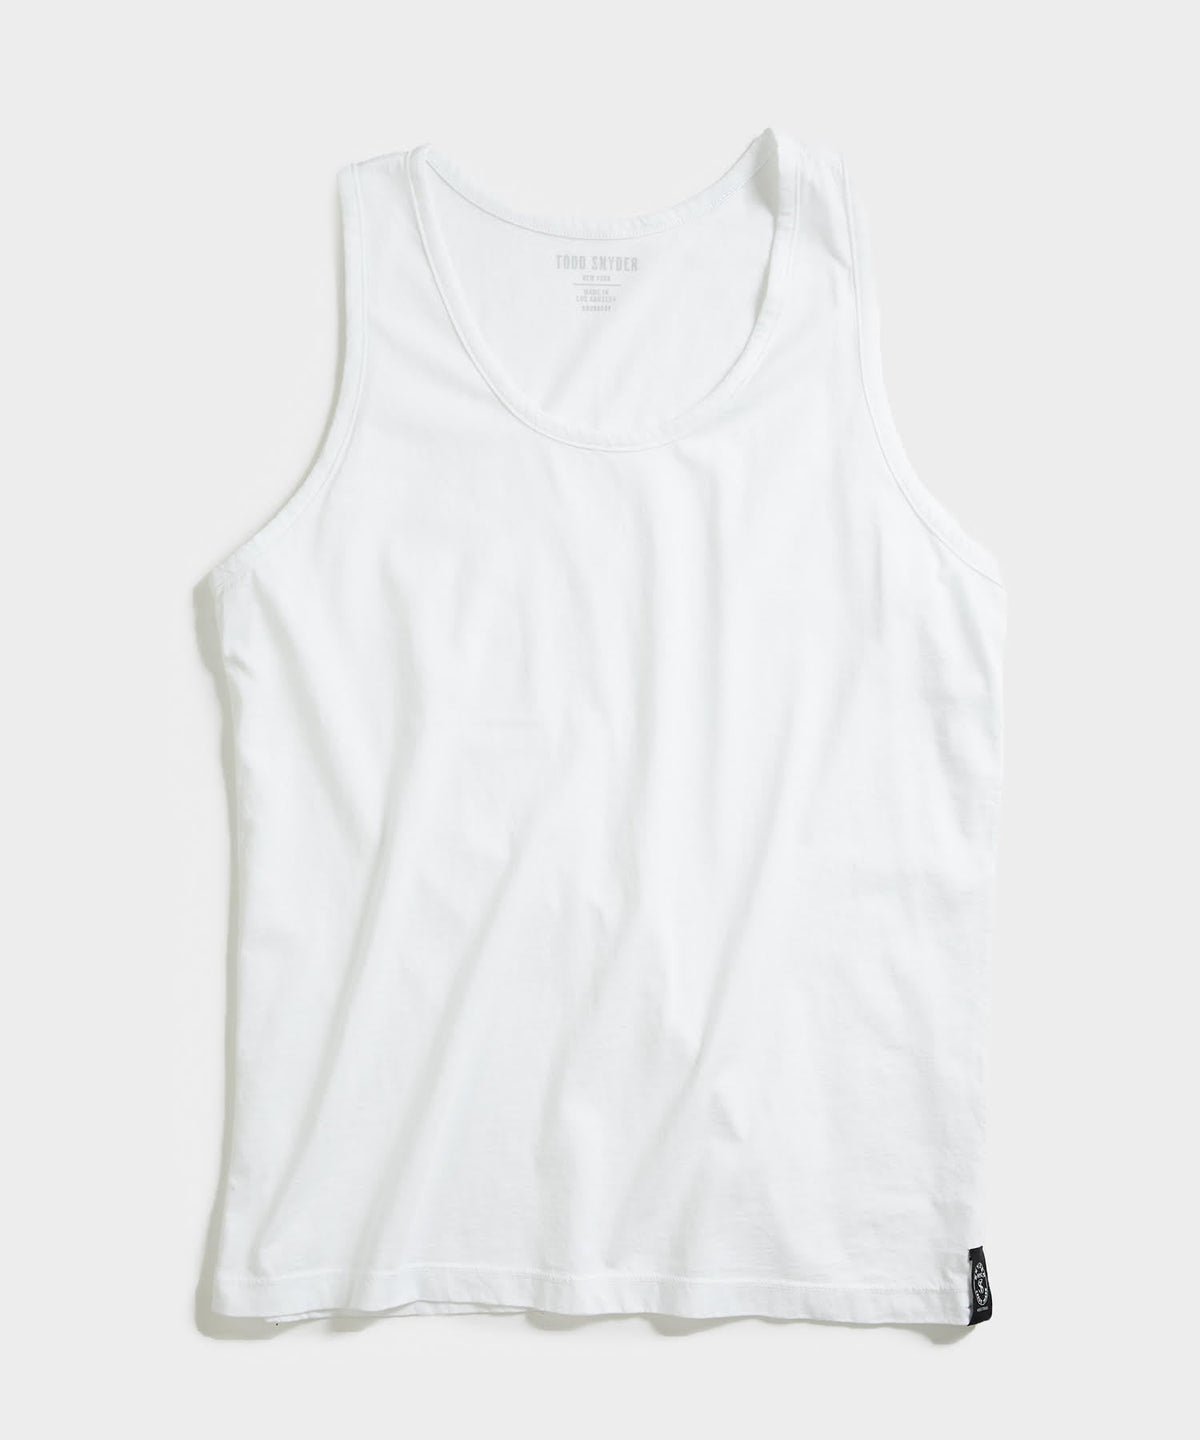 Made in L.A. Tank Top in White